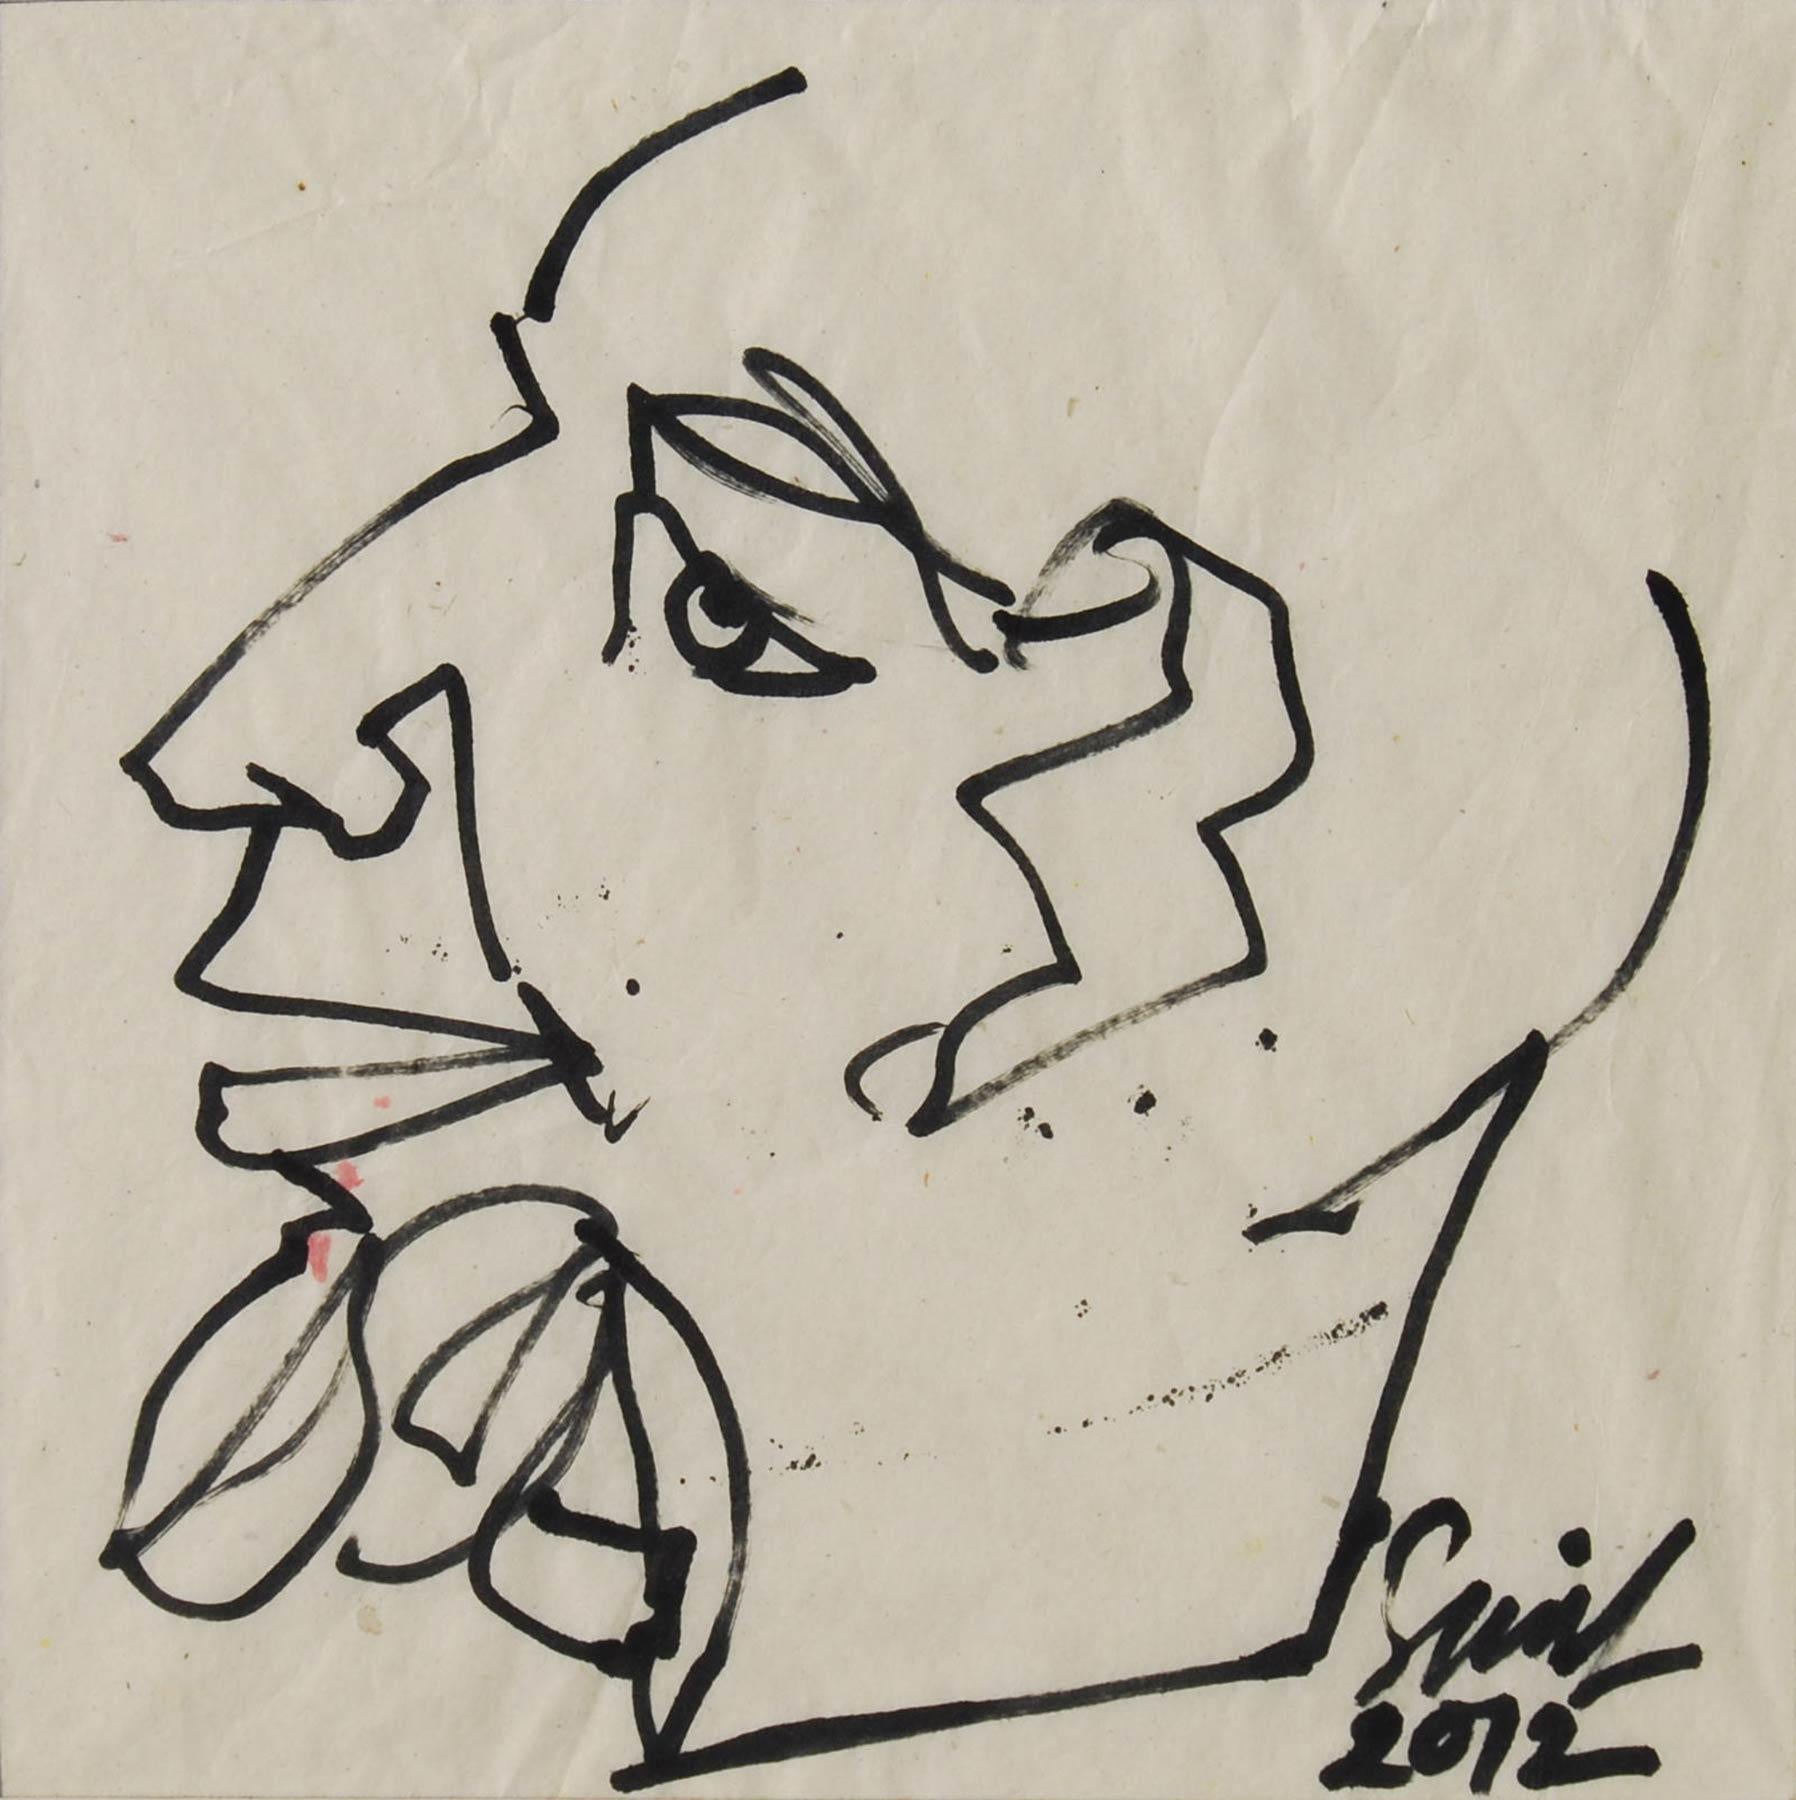 Sunil Das - Head - 7 x 7 inches (unframed size)
Ink on Paper
Inclusive of shipment in ready to hang form.

Sunil Das (1939-2015) was a Master Modern Indian Artist from Bengal. Extremely successful right from his college days, Sunil Das has been